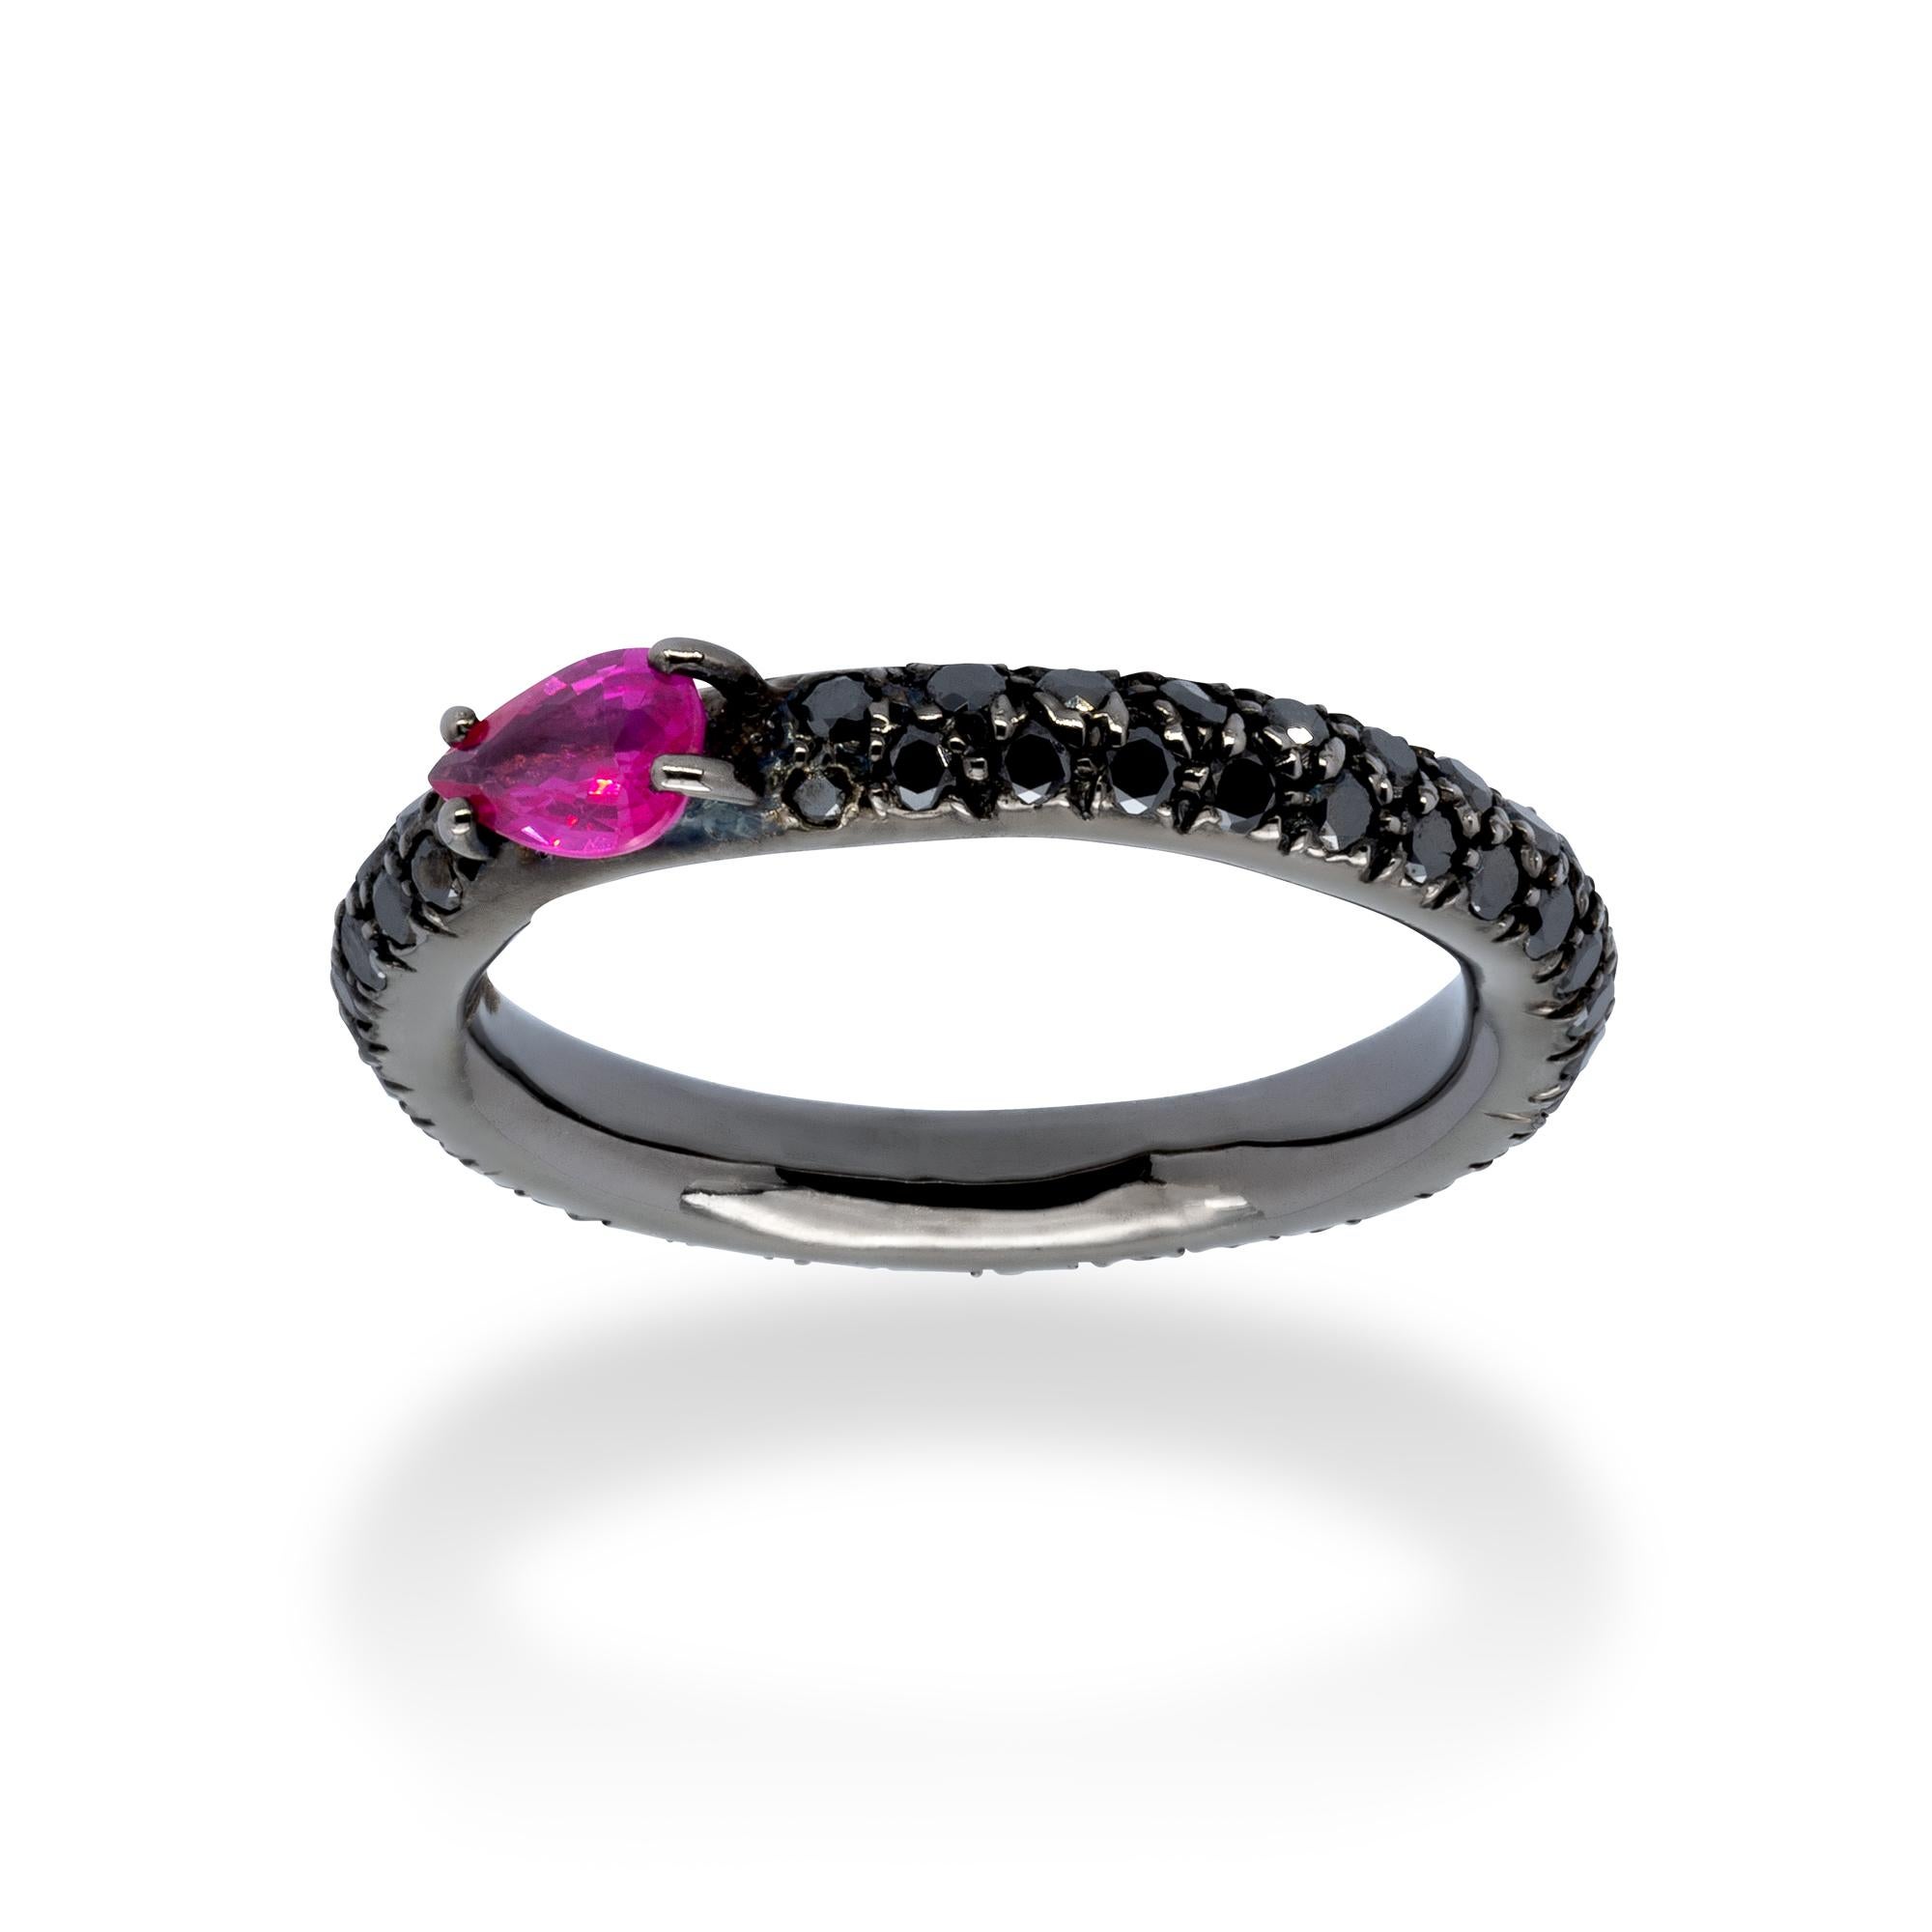 A Ring from d'Avossa Rainbow Collection in black 18 kt gold with a pavé of 1.25 cts of black diamonds and a central pear shape ruby of 0.46 cts.

This Ring has been designed to be worn alone, or together with one or more rings of the same